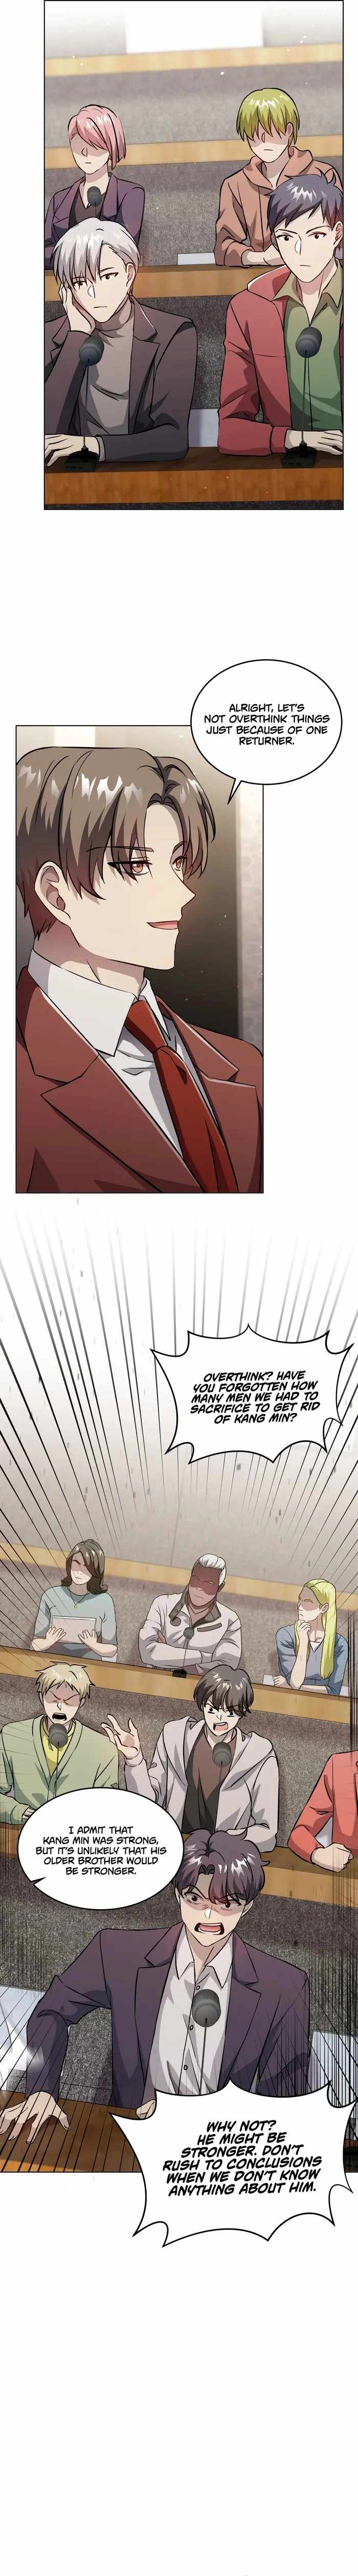 The Iron-Blooded Necromancer Has Returned Chapter 9